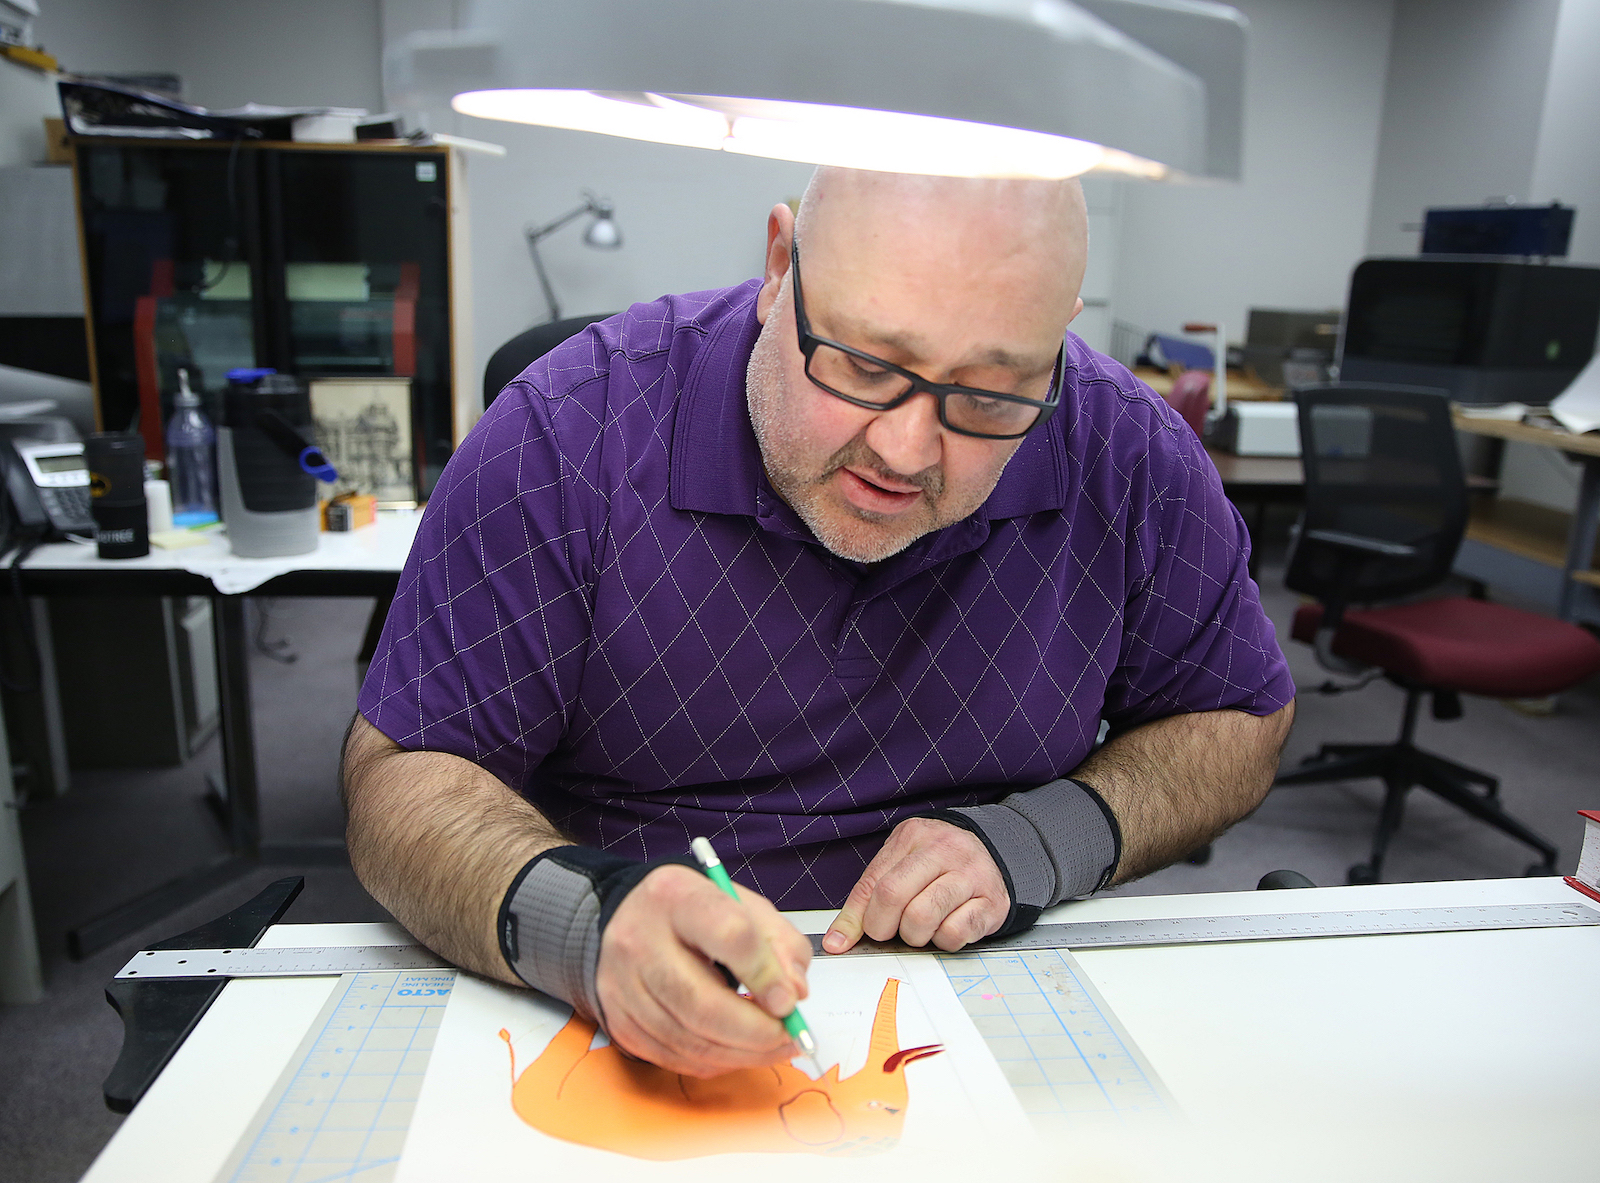 A Clovernook Center employee carefully produces a tactile graphic of an elephant by hand.